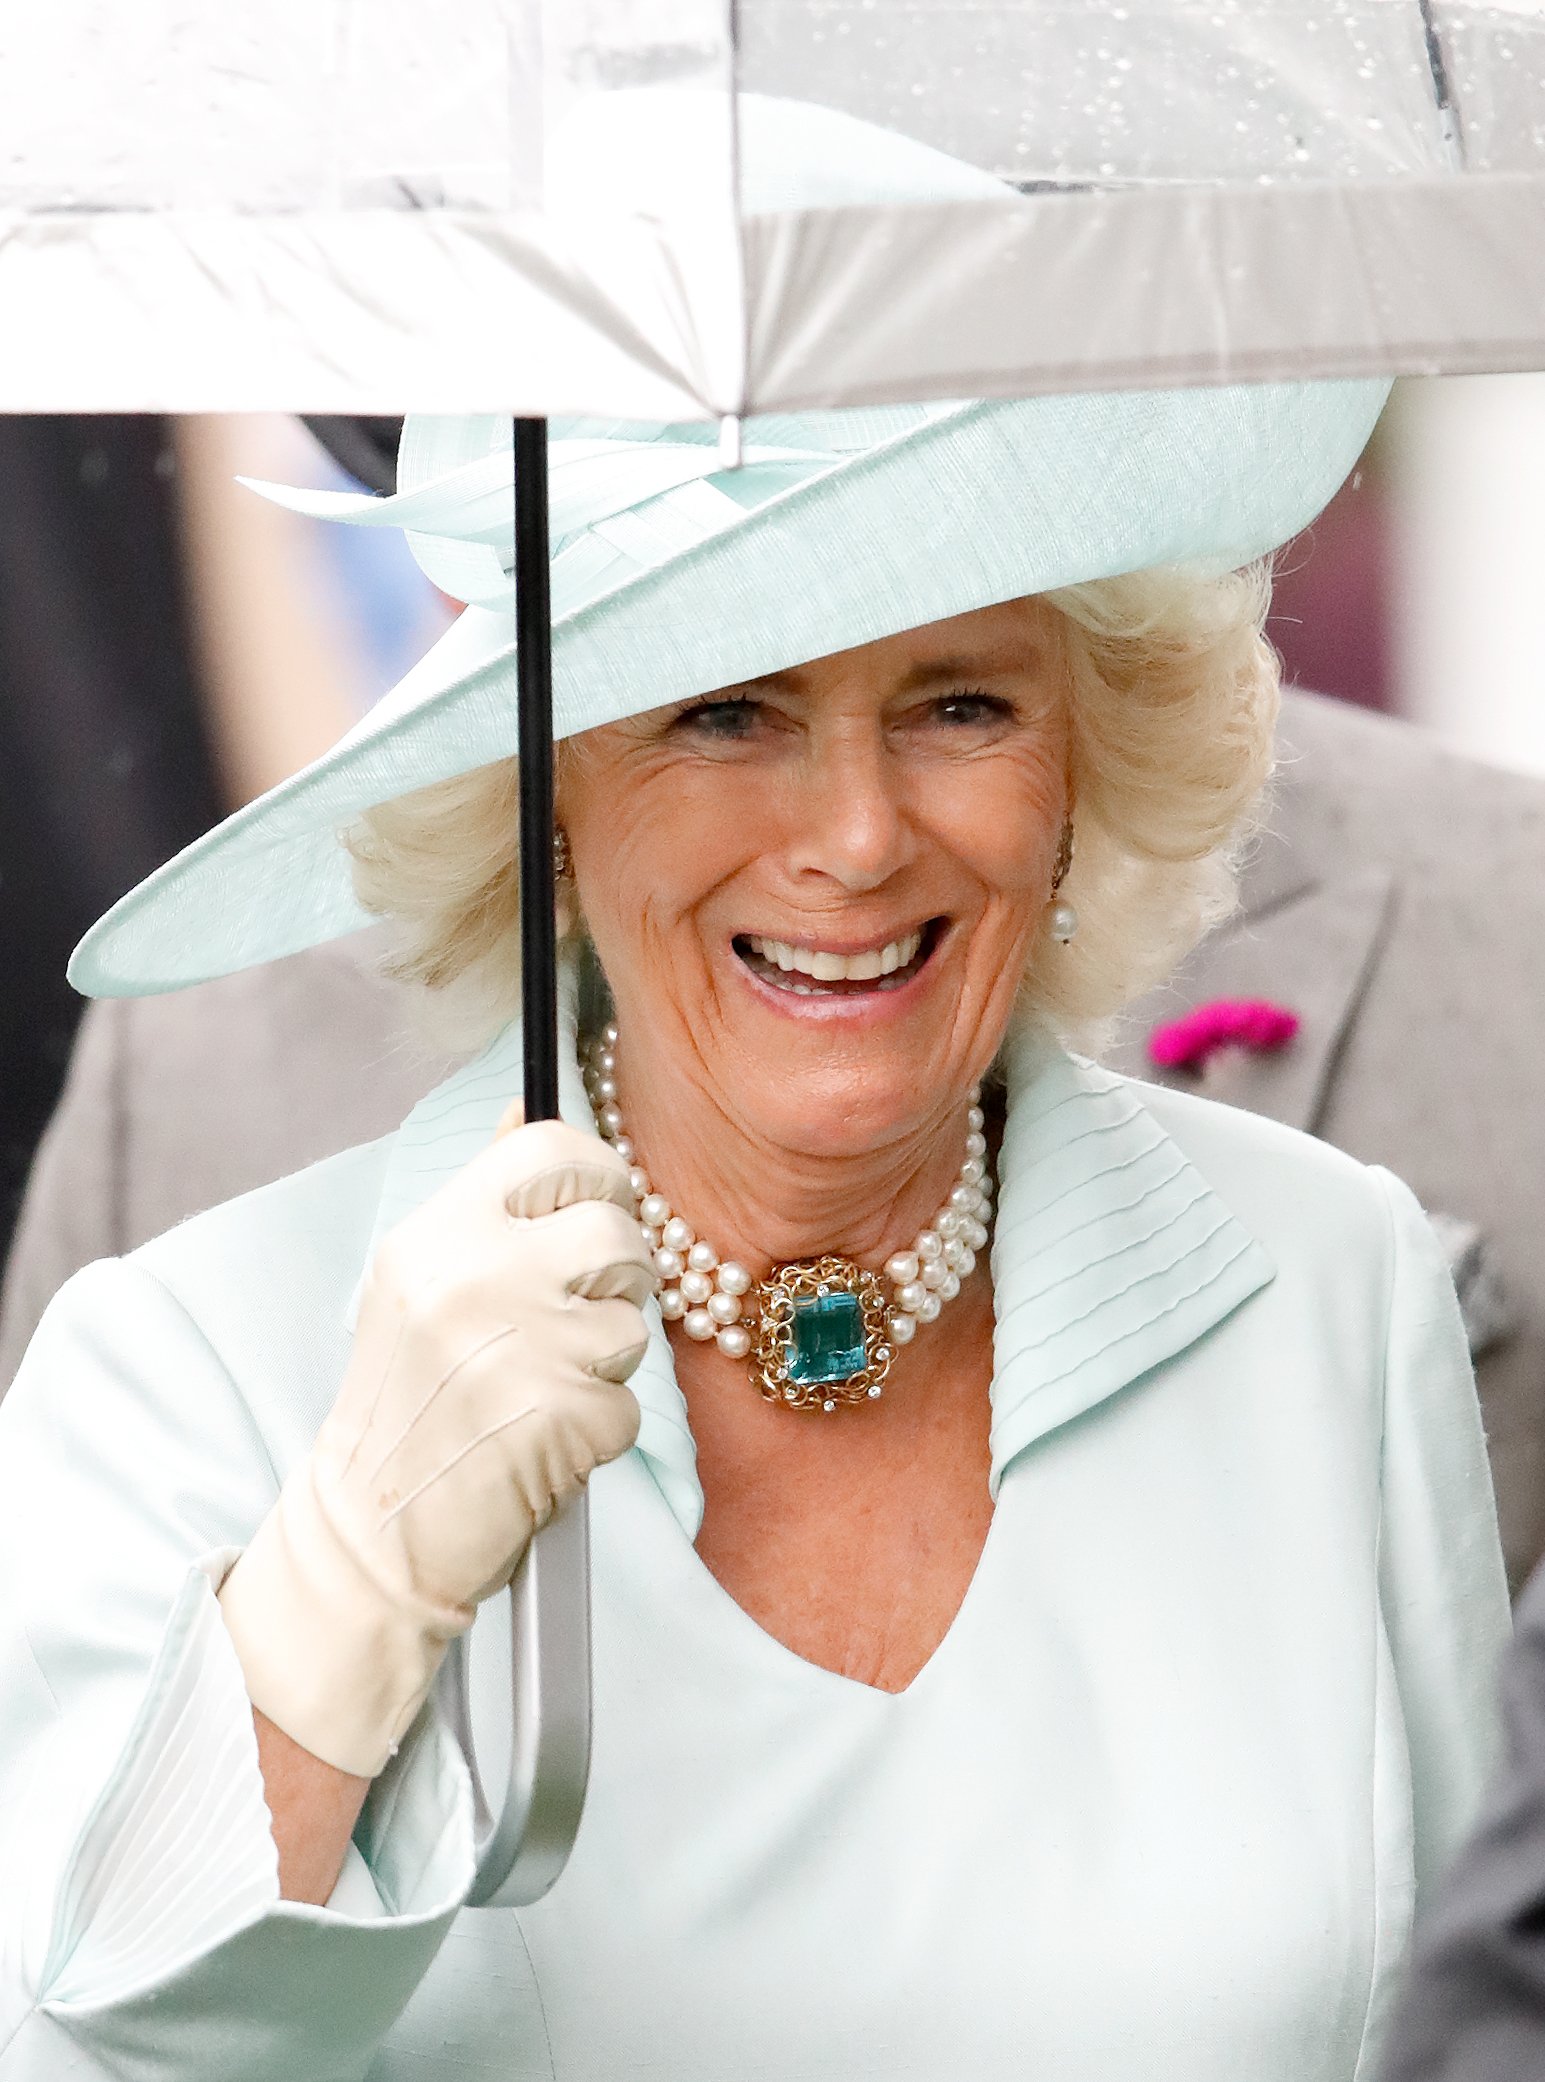 Camilla, Duchess of Cornwall, covers herself with an umbrella as she attends the Royal Ascot on June 19, 2019, in Ascot, England | Source: Getty Images